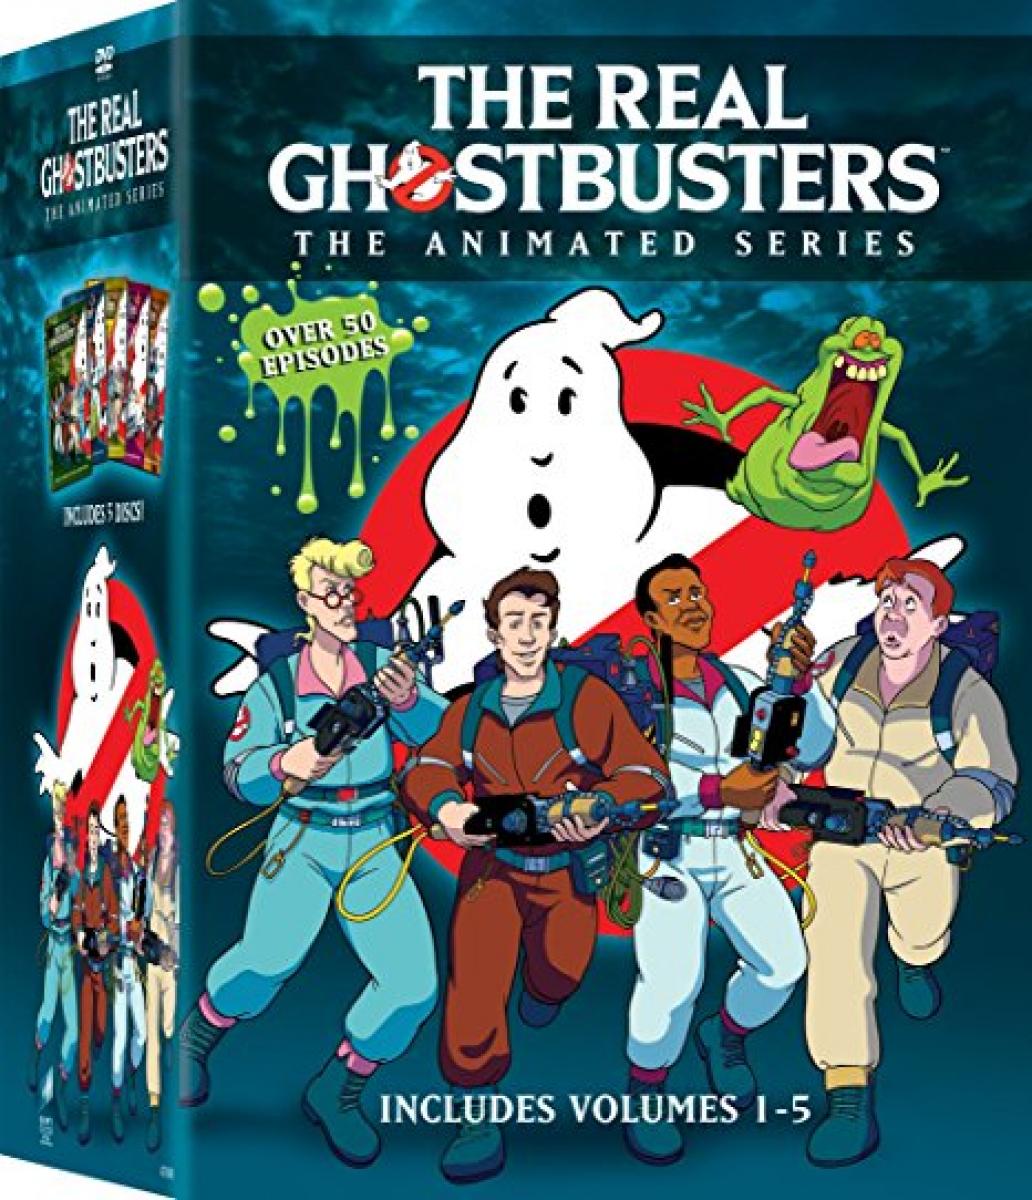 The Real Ghostbusters: The Animated Series